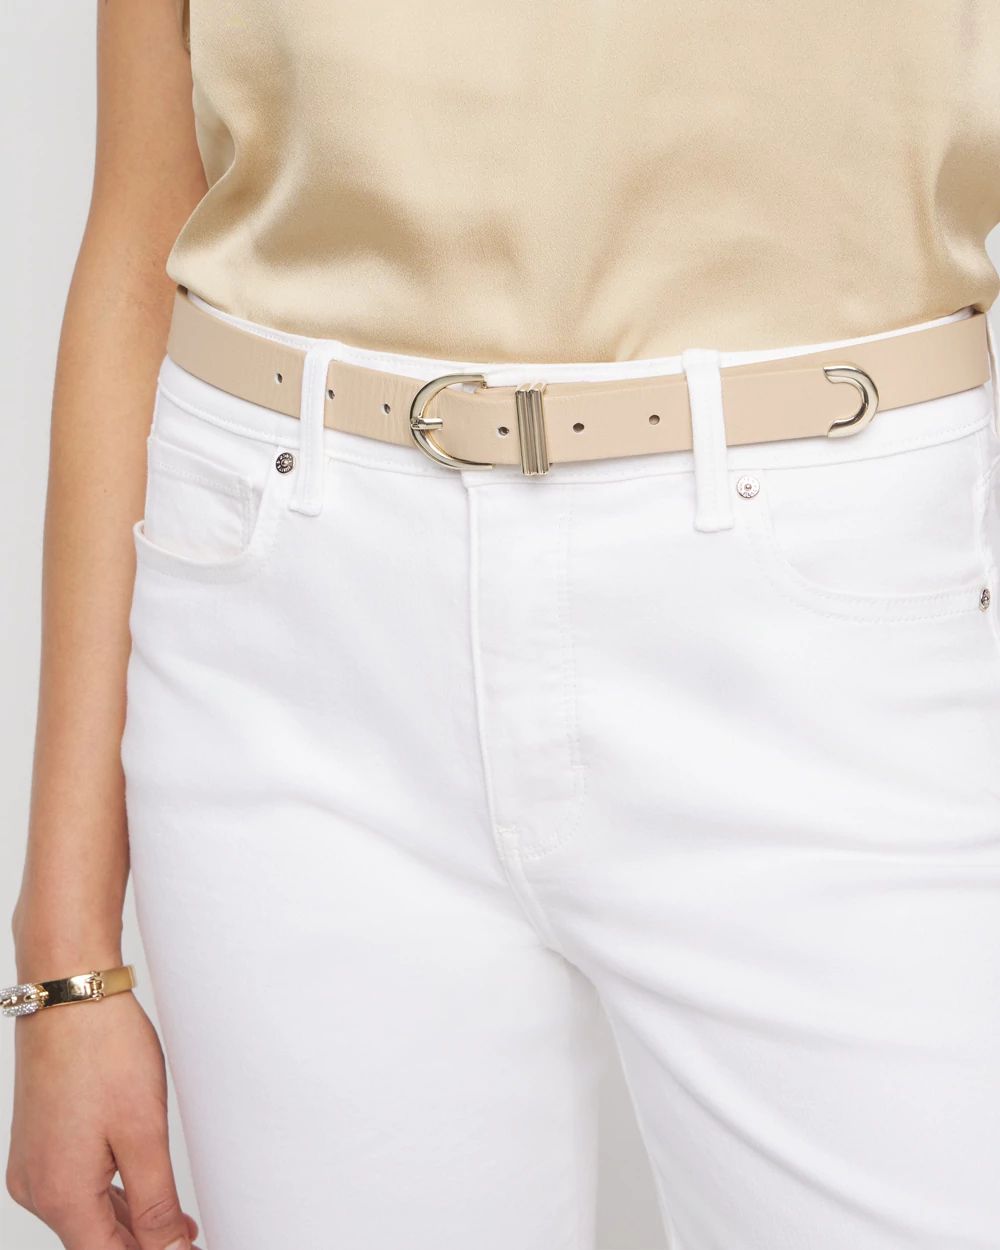 Capped Leather Pant Belt